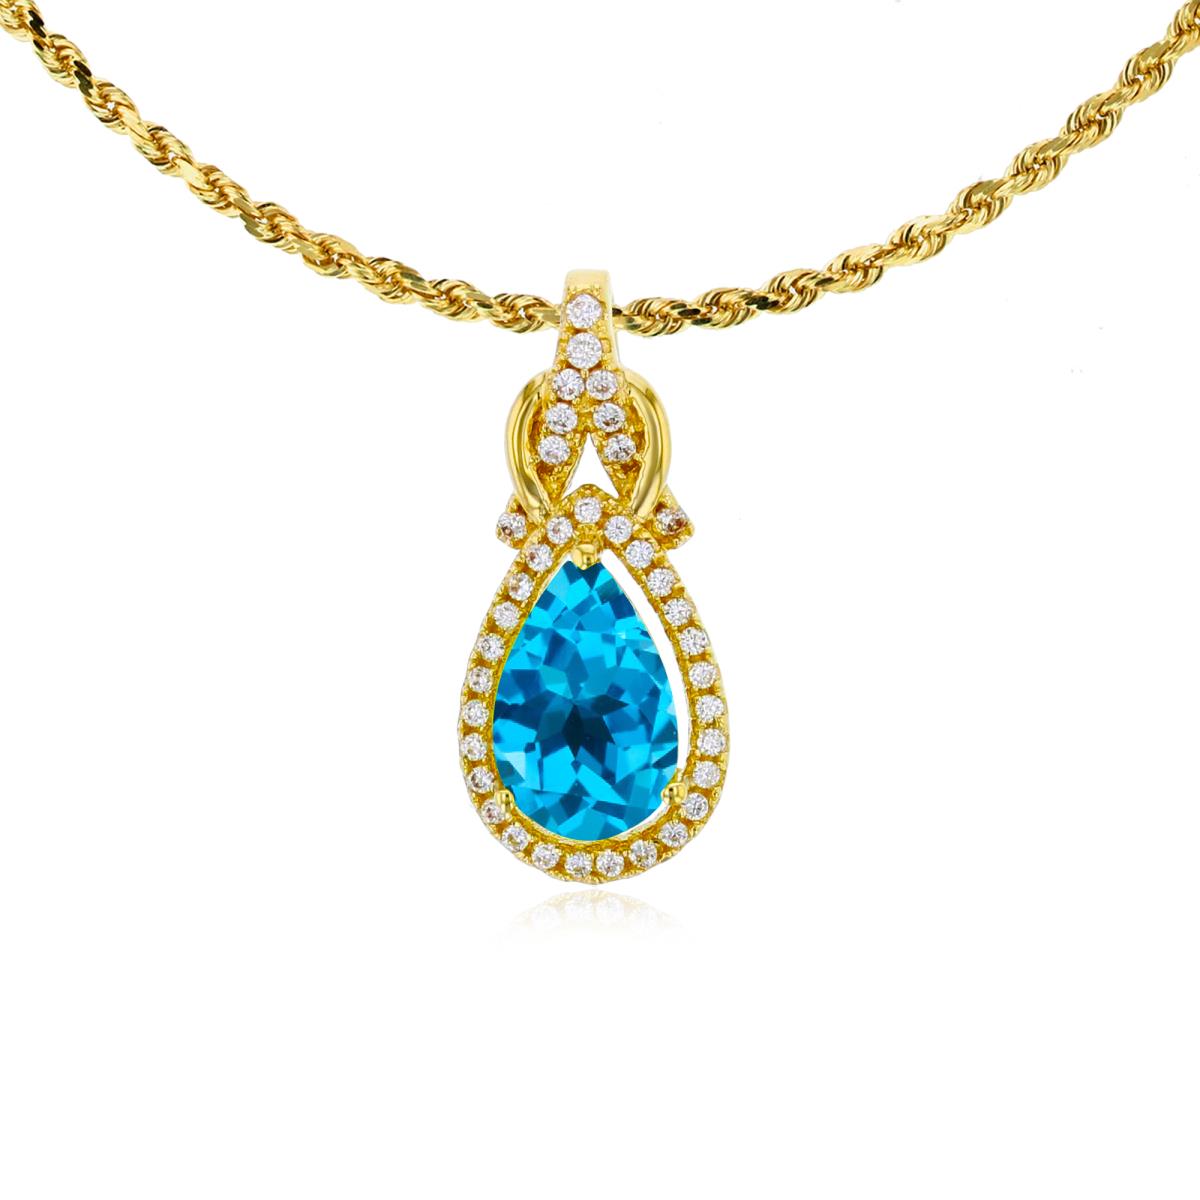 10K Yellow Gold 8x5mm Pear Cut Swiss Blue Topaz & 0.11 CTTW Rnd Diamond Knot 18" Rope Chain Necklace